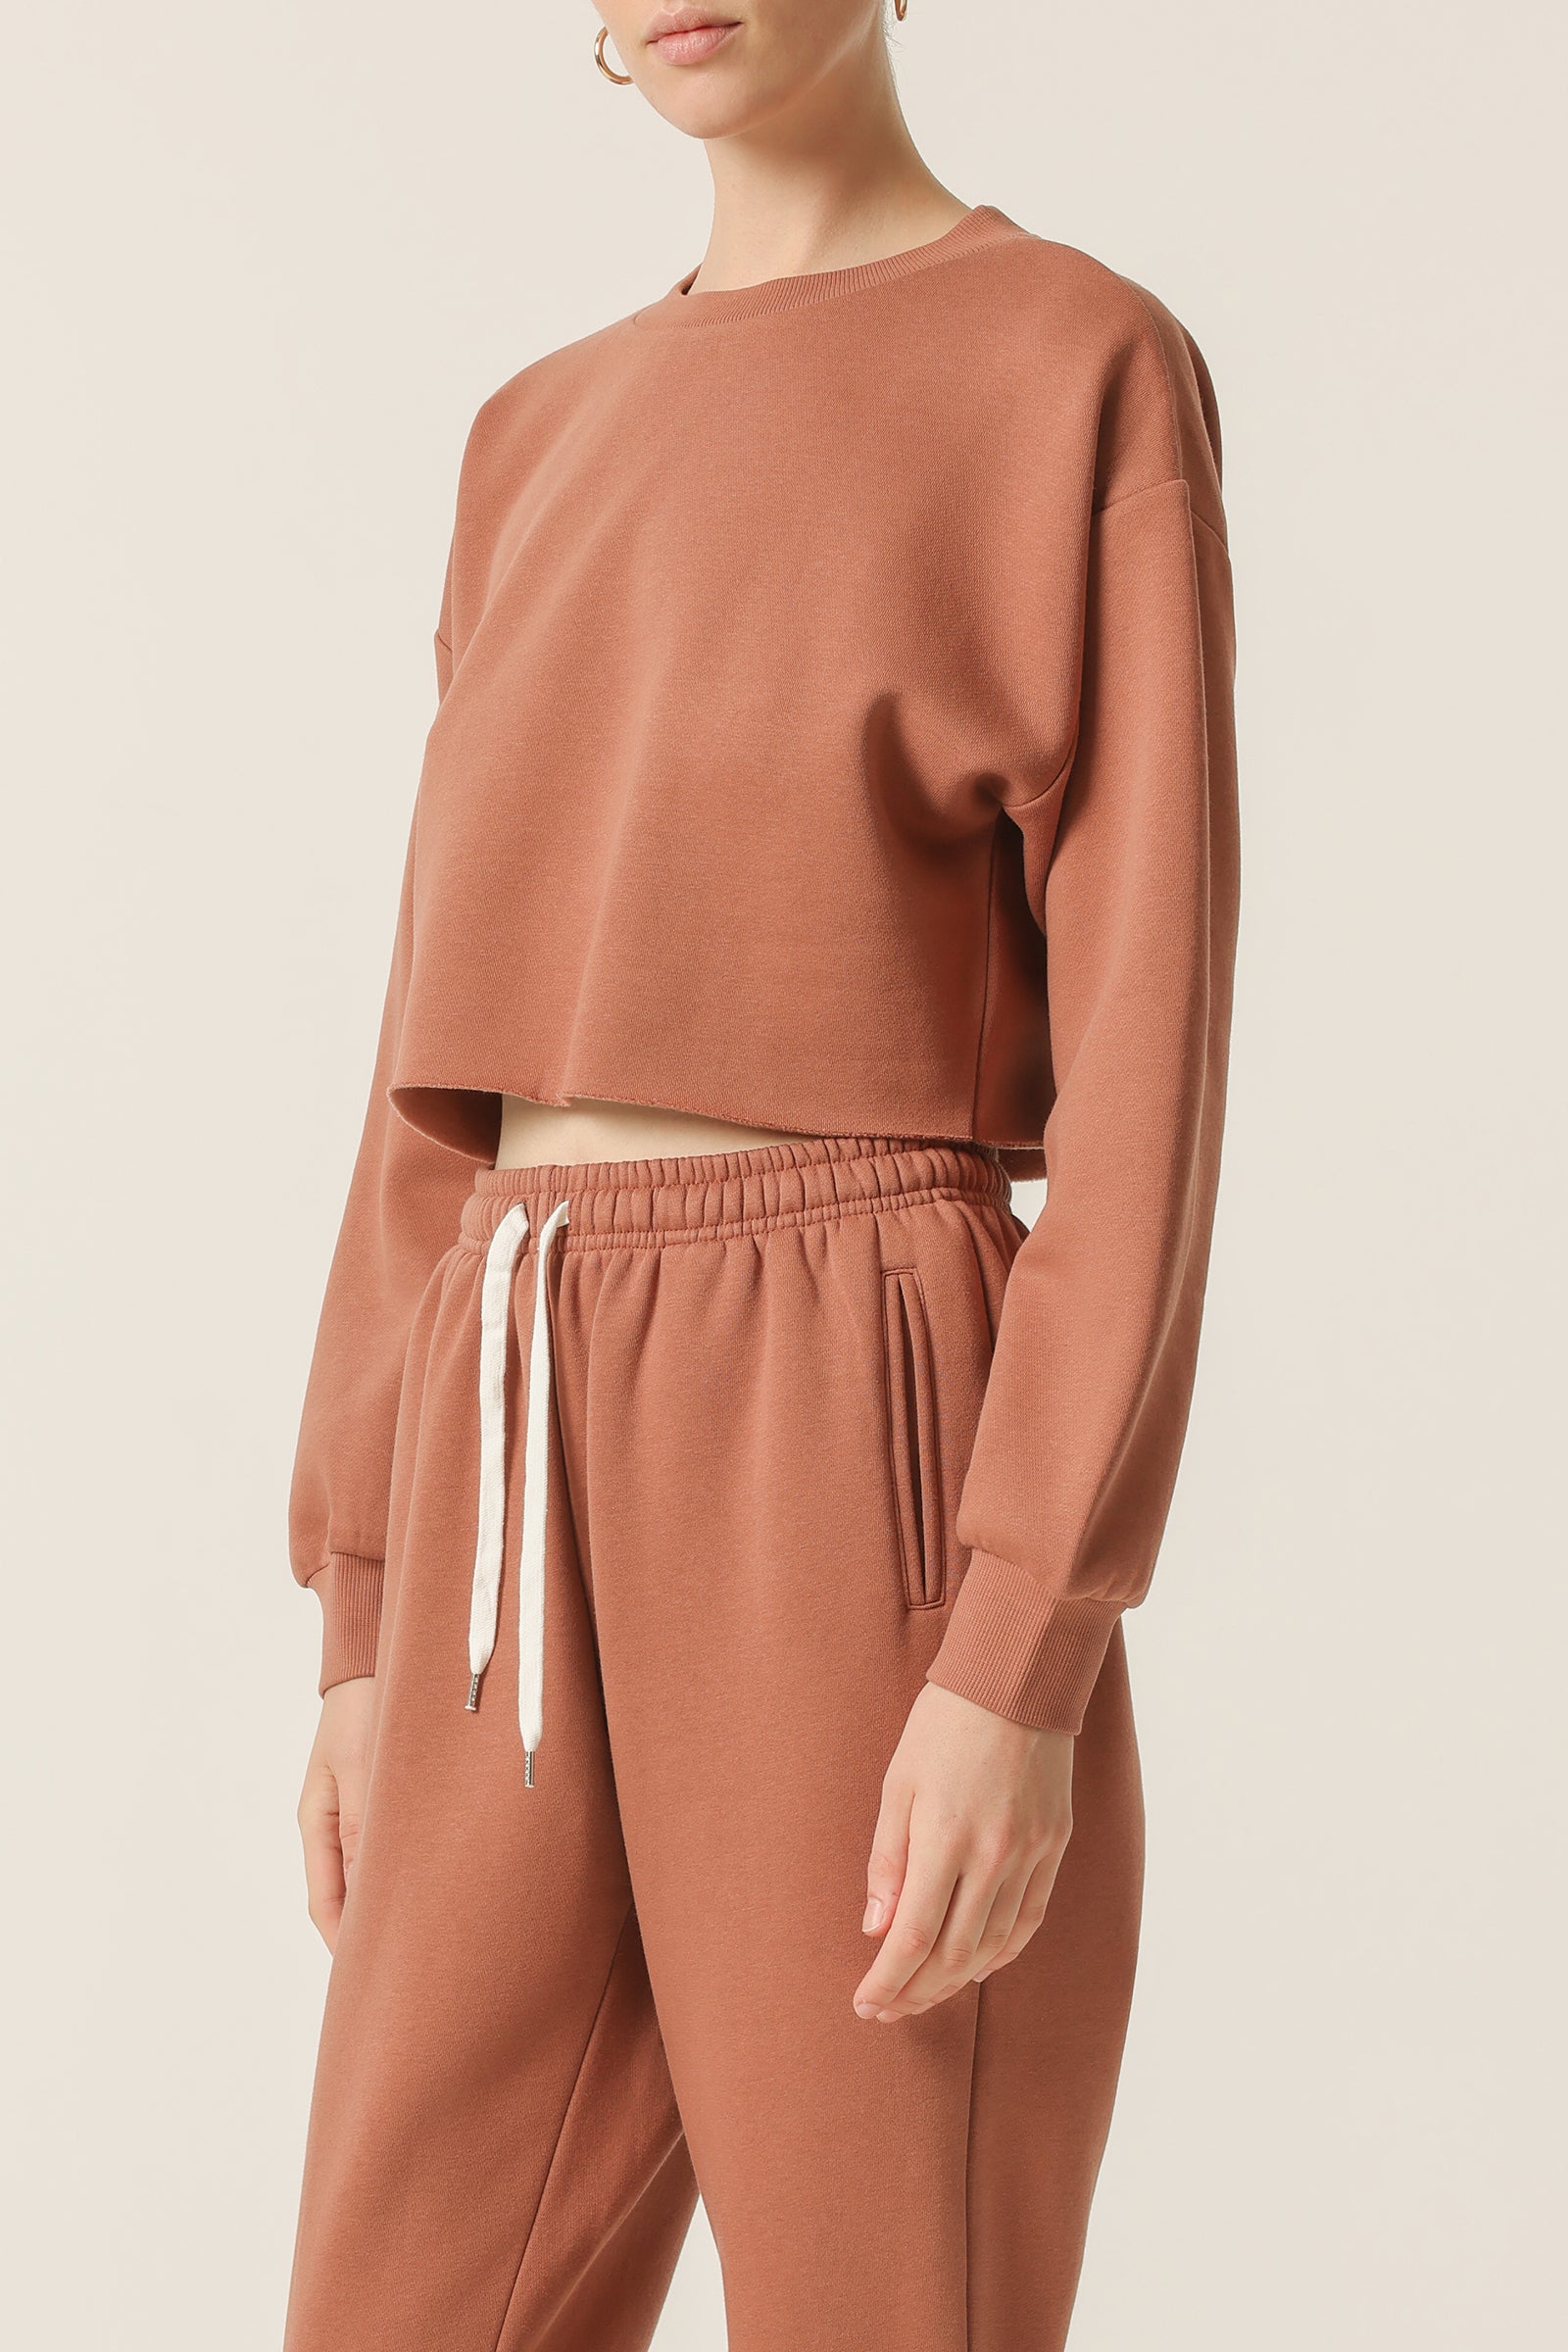 Nude Lucy Carter Classic Crop Sweat In A Light Brown Brandy Colour 